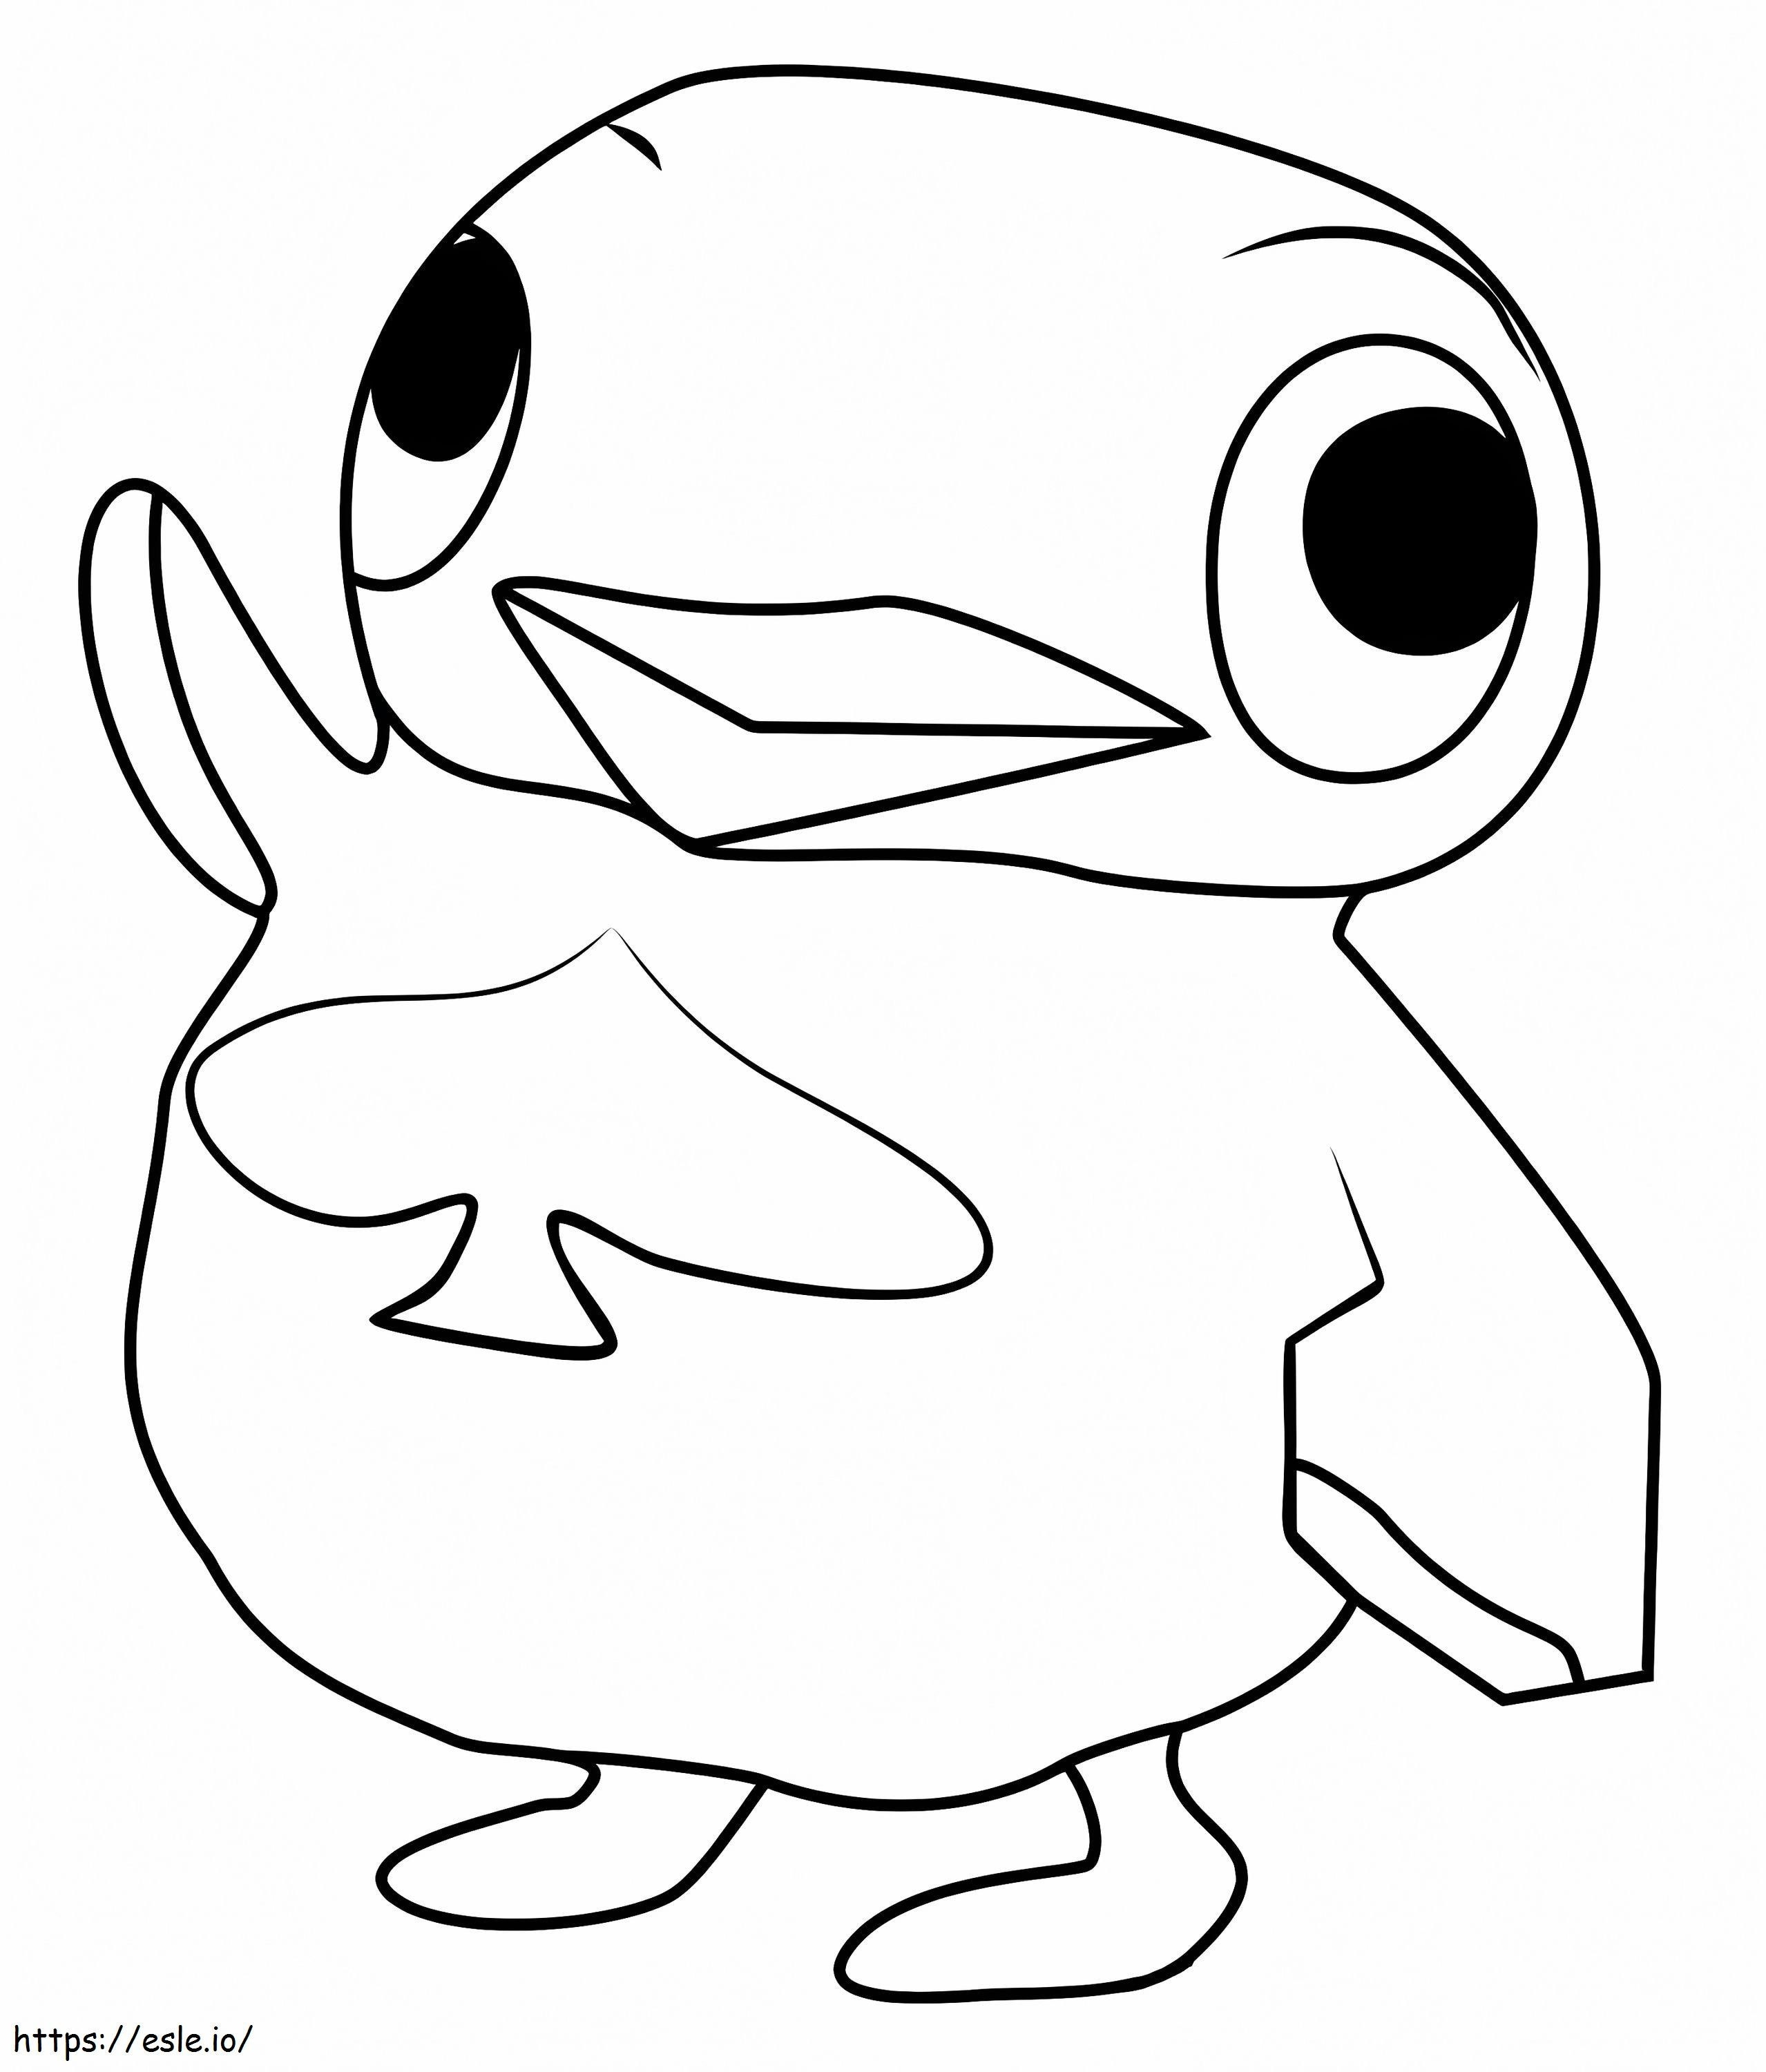 Wade From Animal Crossing coloring page